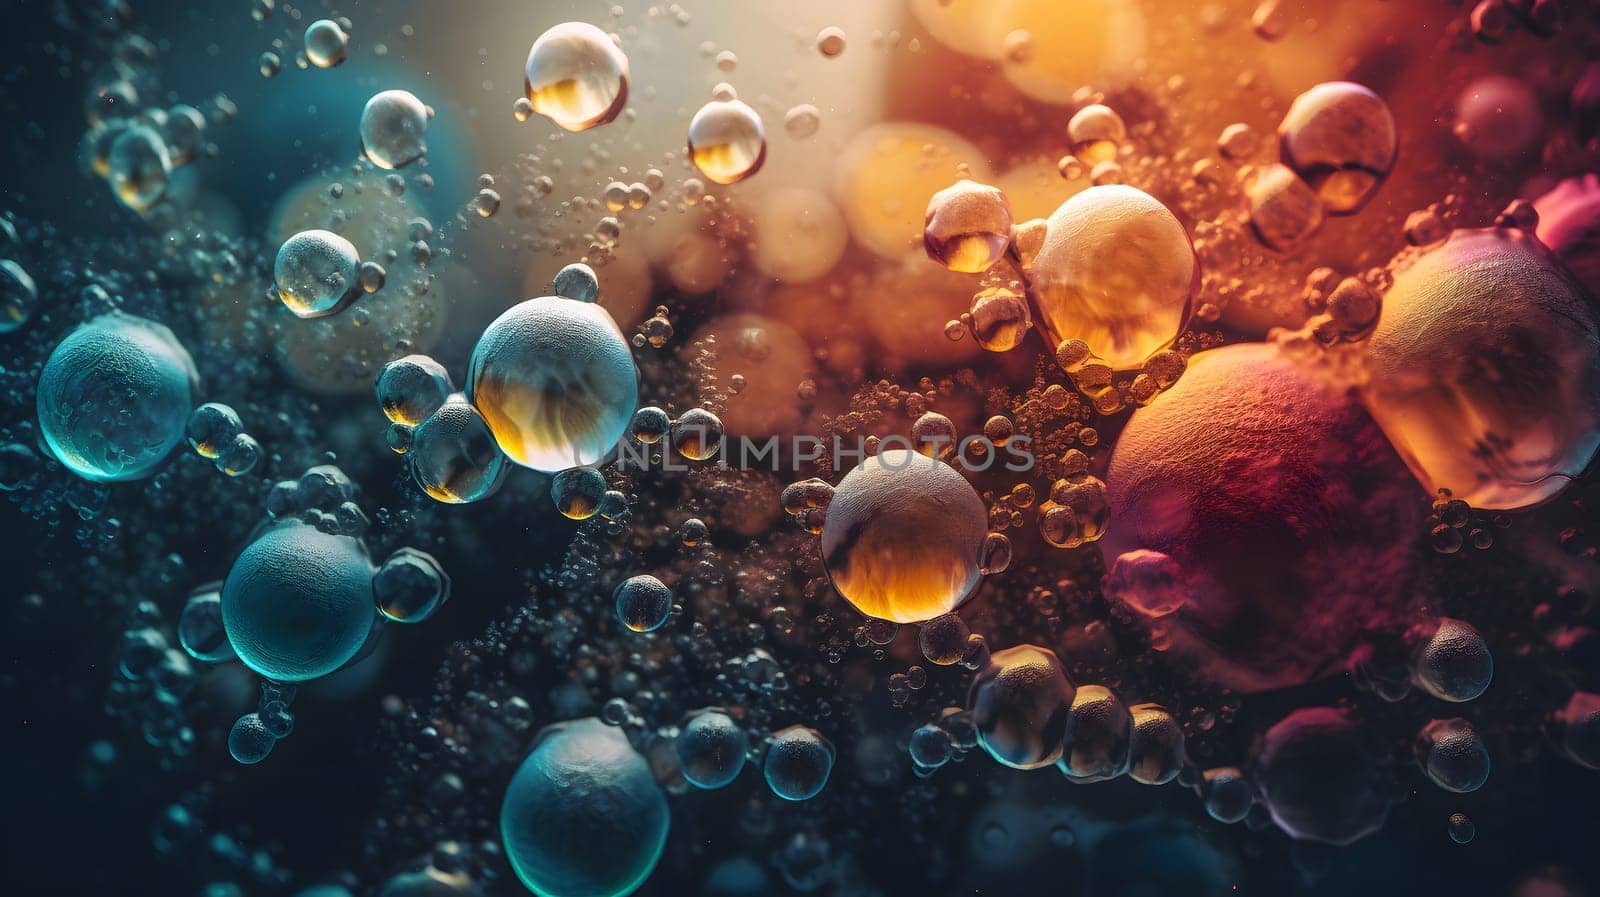 abstract background and wallpaper of clolorful bubbles in teal-orange tones. Neural network generated in May 2023. Not based on any actual scene or pattern.